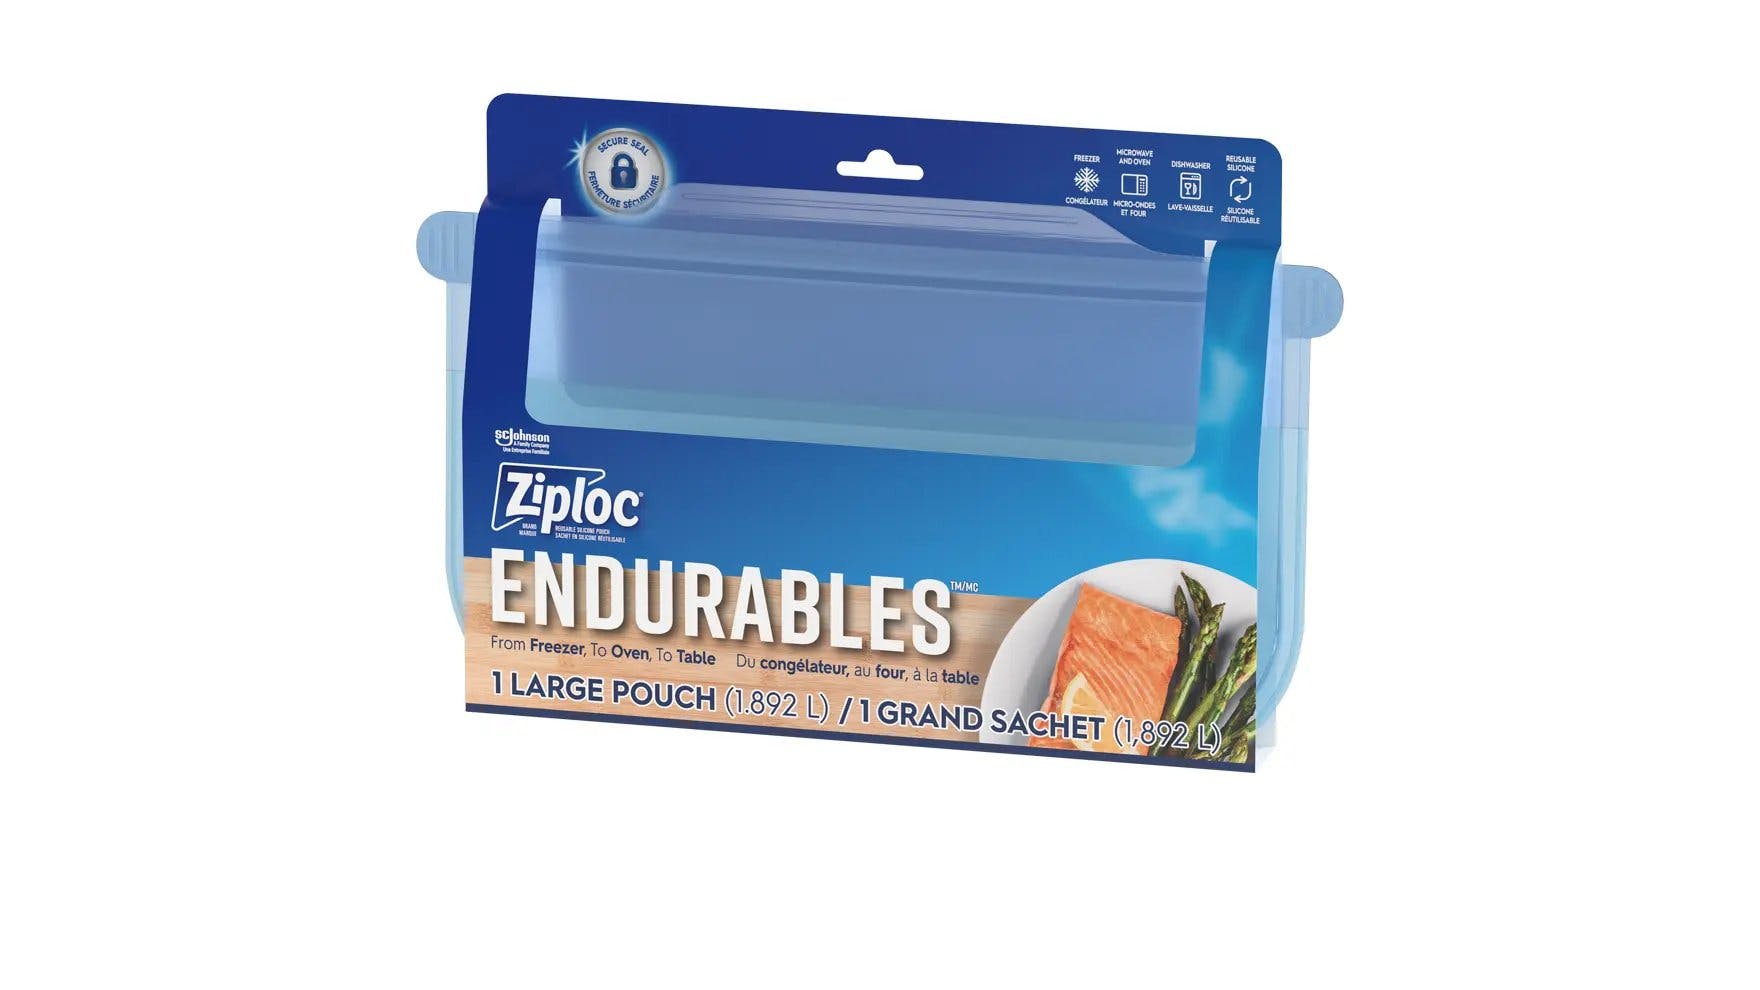 Angle of Ziploc large pouch